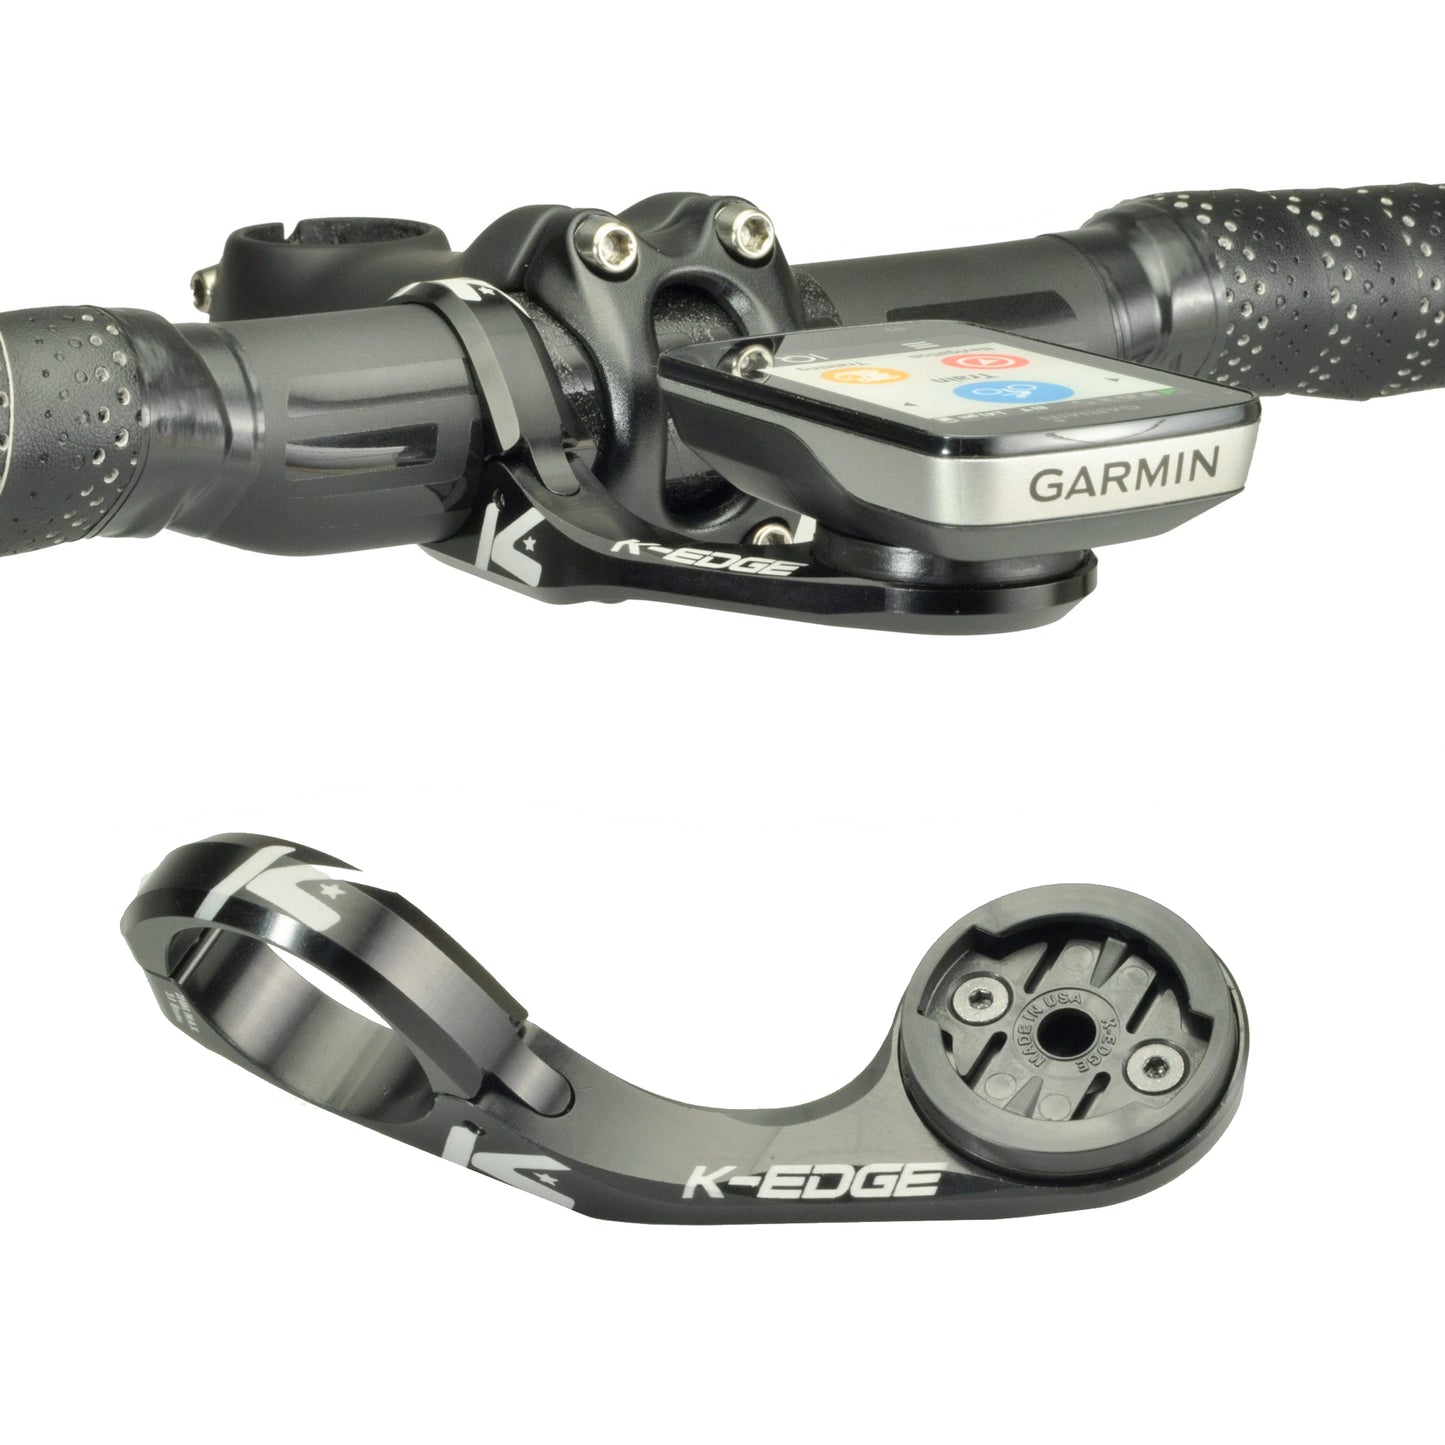 K-Edge Max Mount For Garmin - Fits 31.8mm Handlebars buy online at Woolys Wheels Bicycle Store Sydney